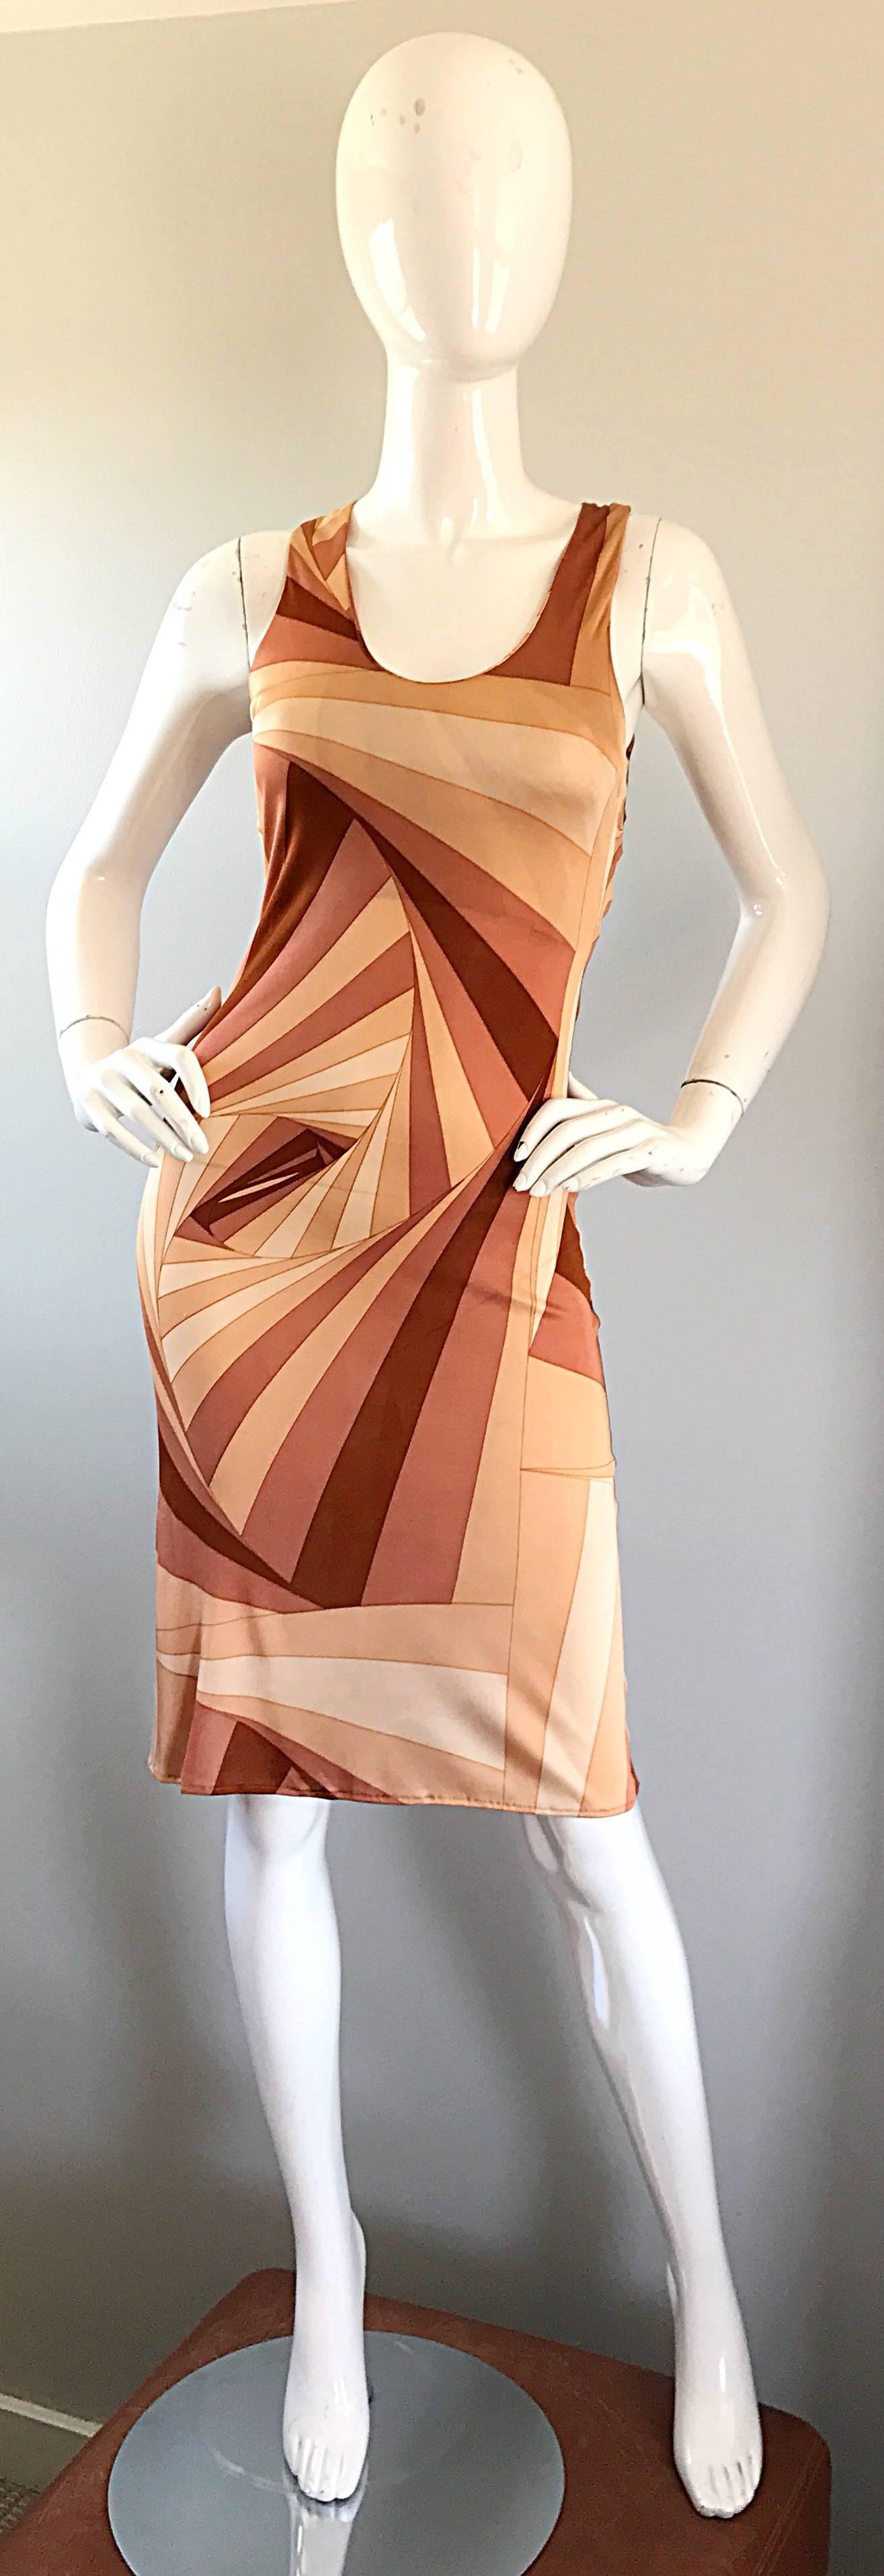 Sexy vintage GIANNI VERSACE Versus bodycon rayon jersey dress! Features warm tones of brown, tan, burgundy, and terra-cotta. 3-D geometric print throughout. Open criss-cross back, with hidden zipper up the side and hook-and-eye closure. Super